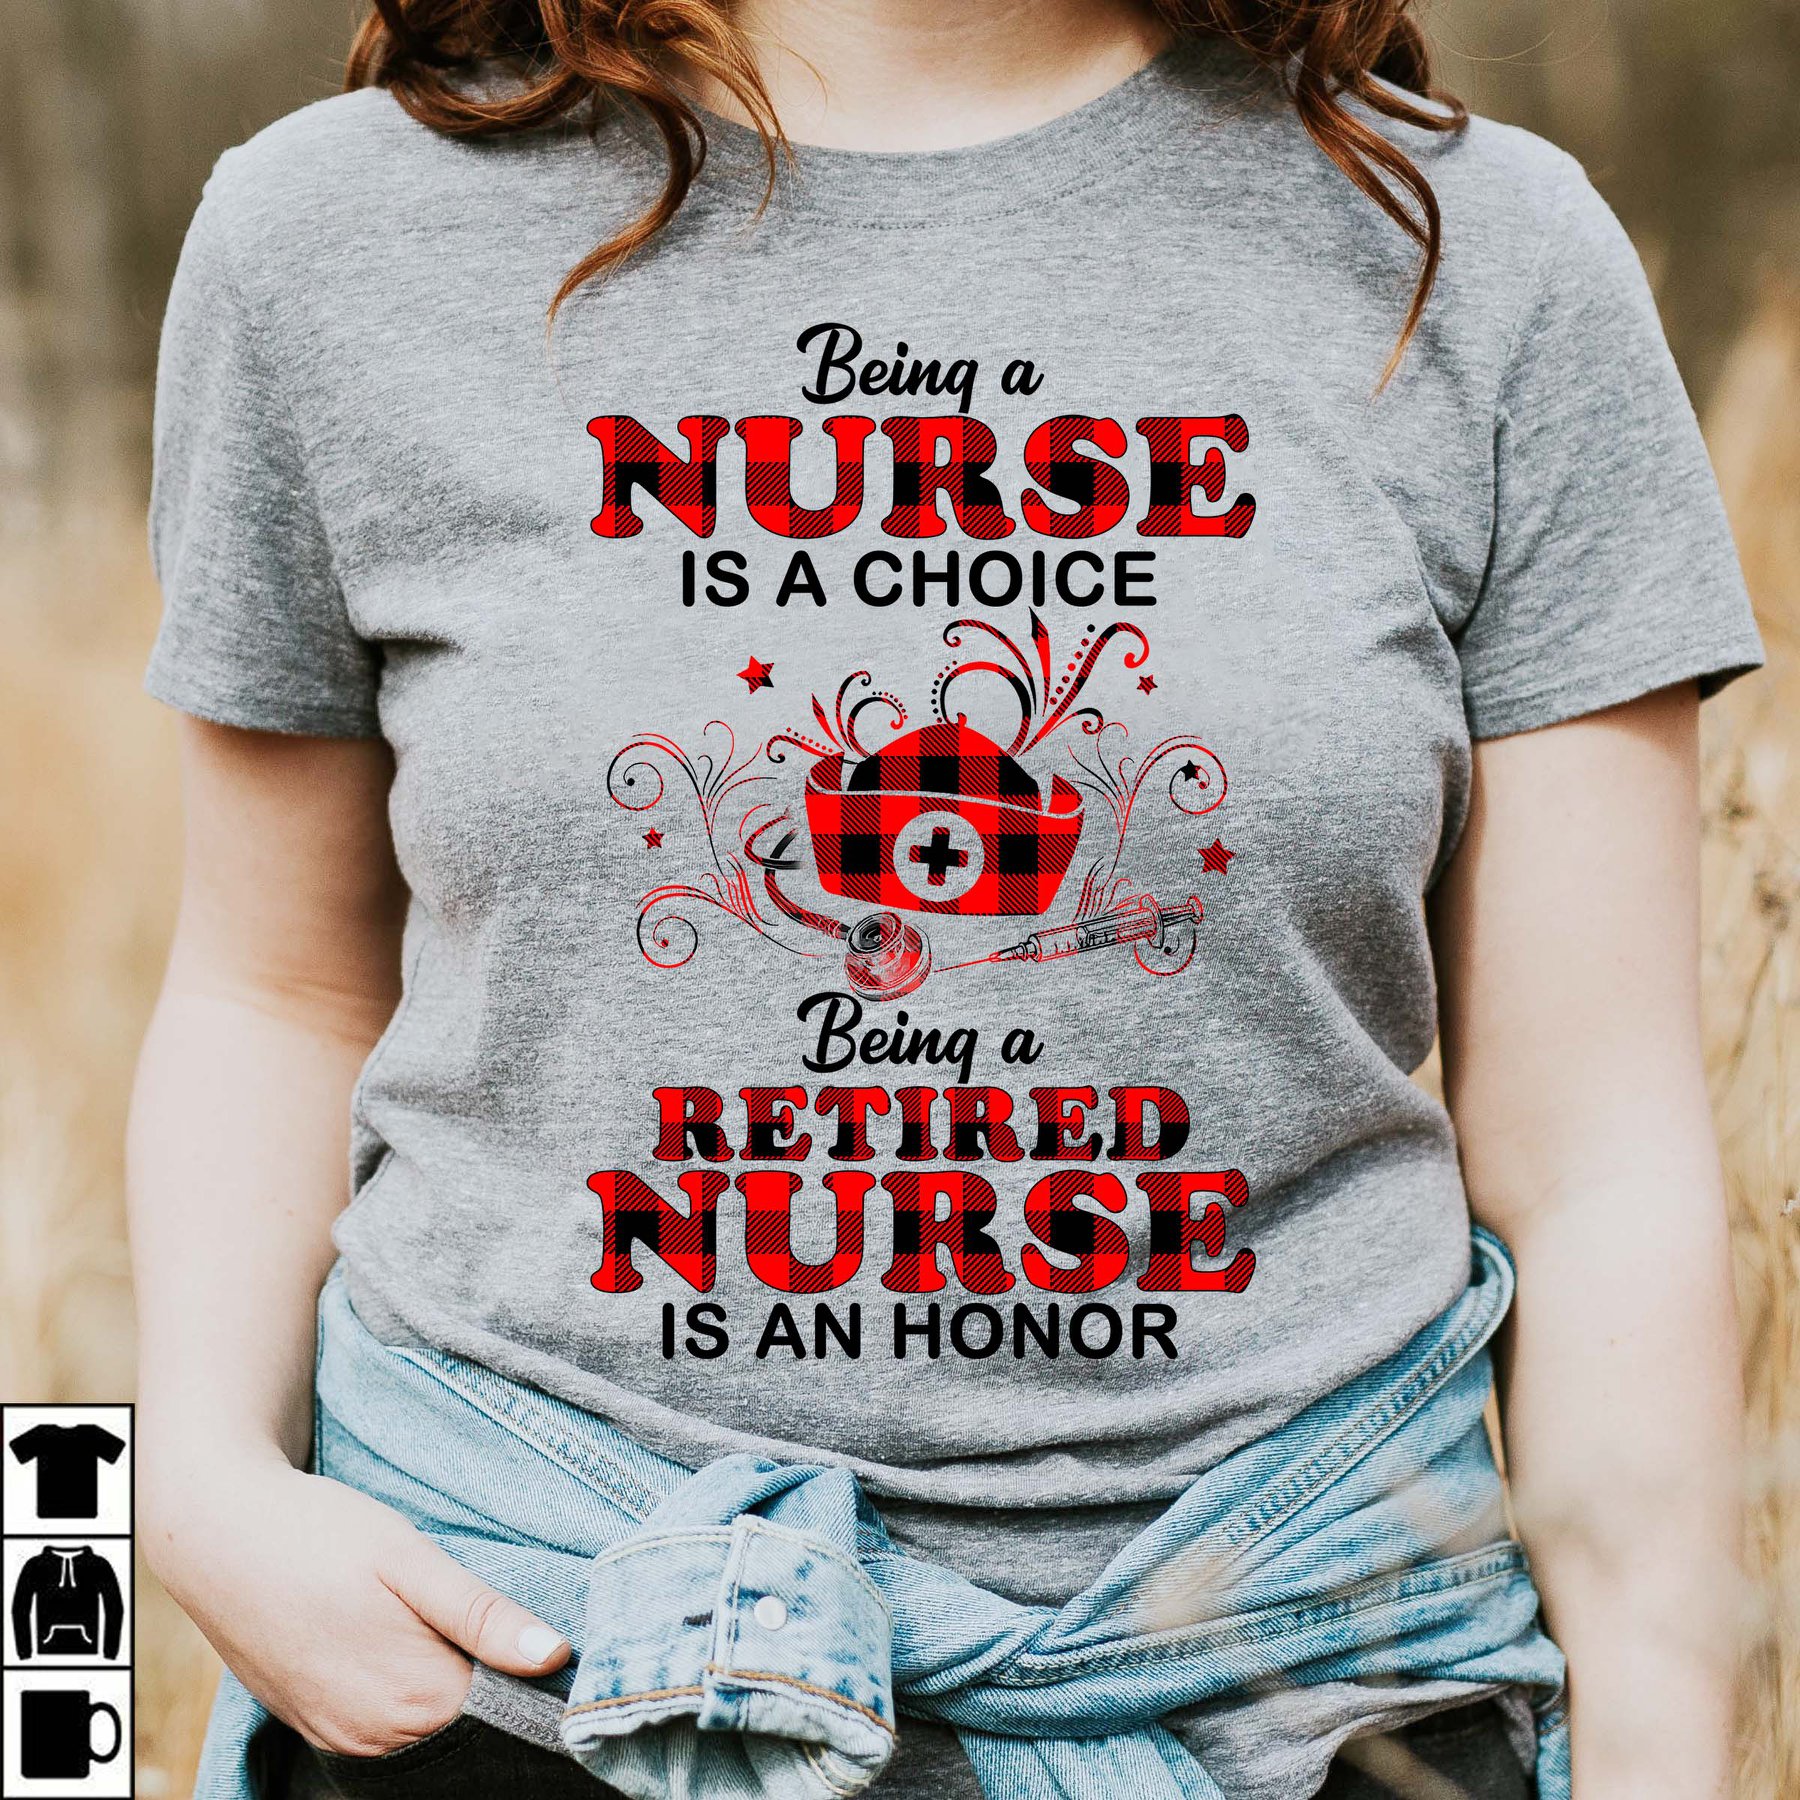 Being a nurse is a choice being a retired nurse is an honor